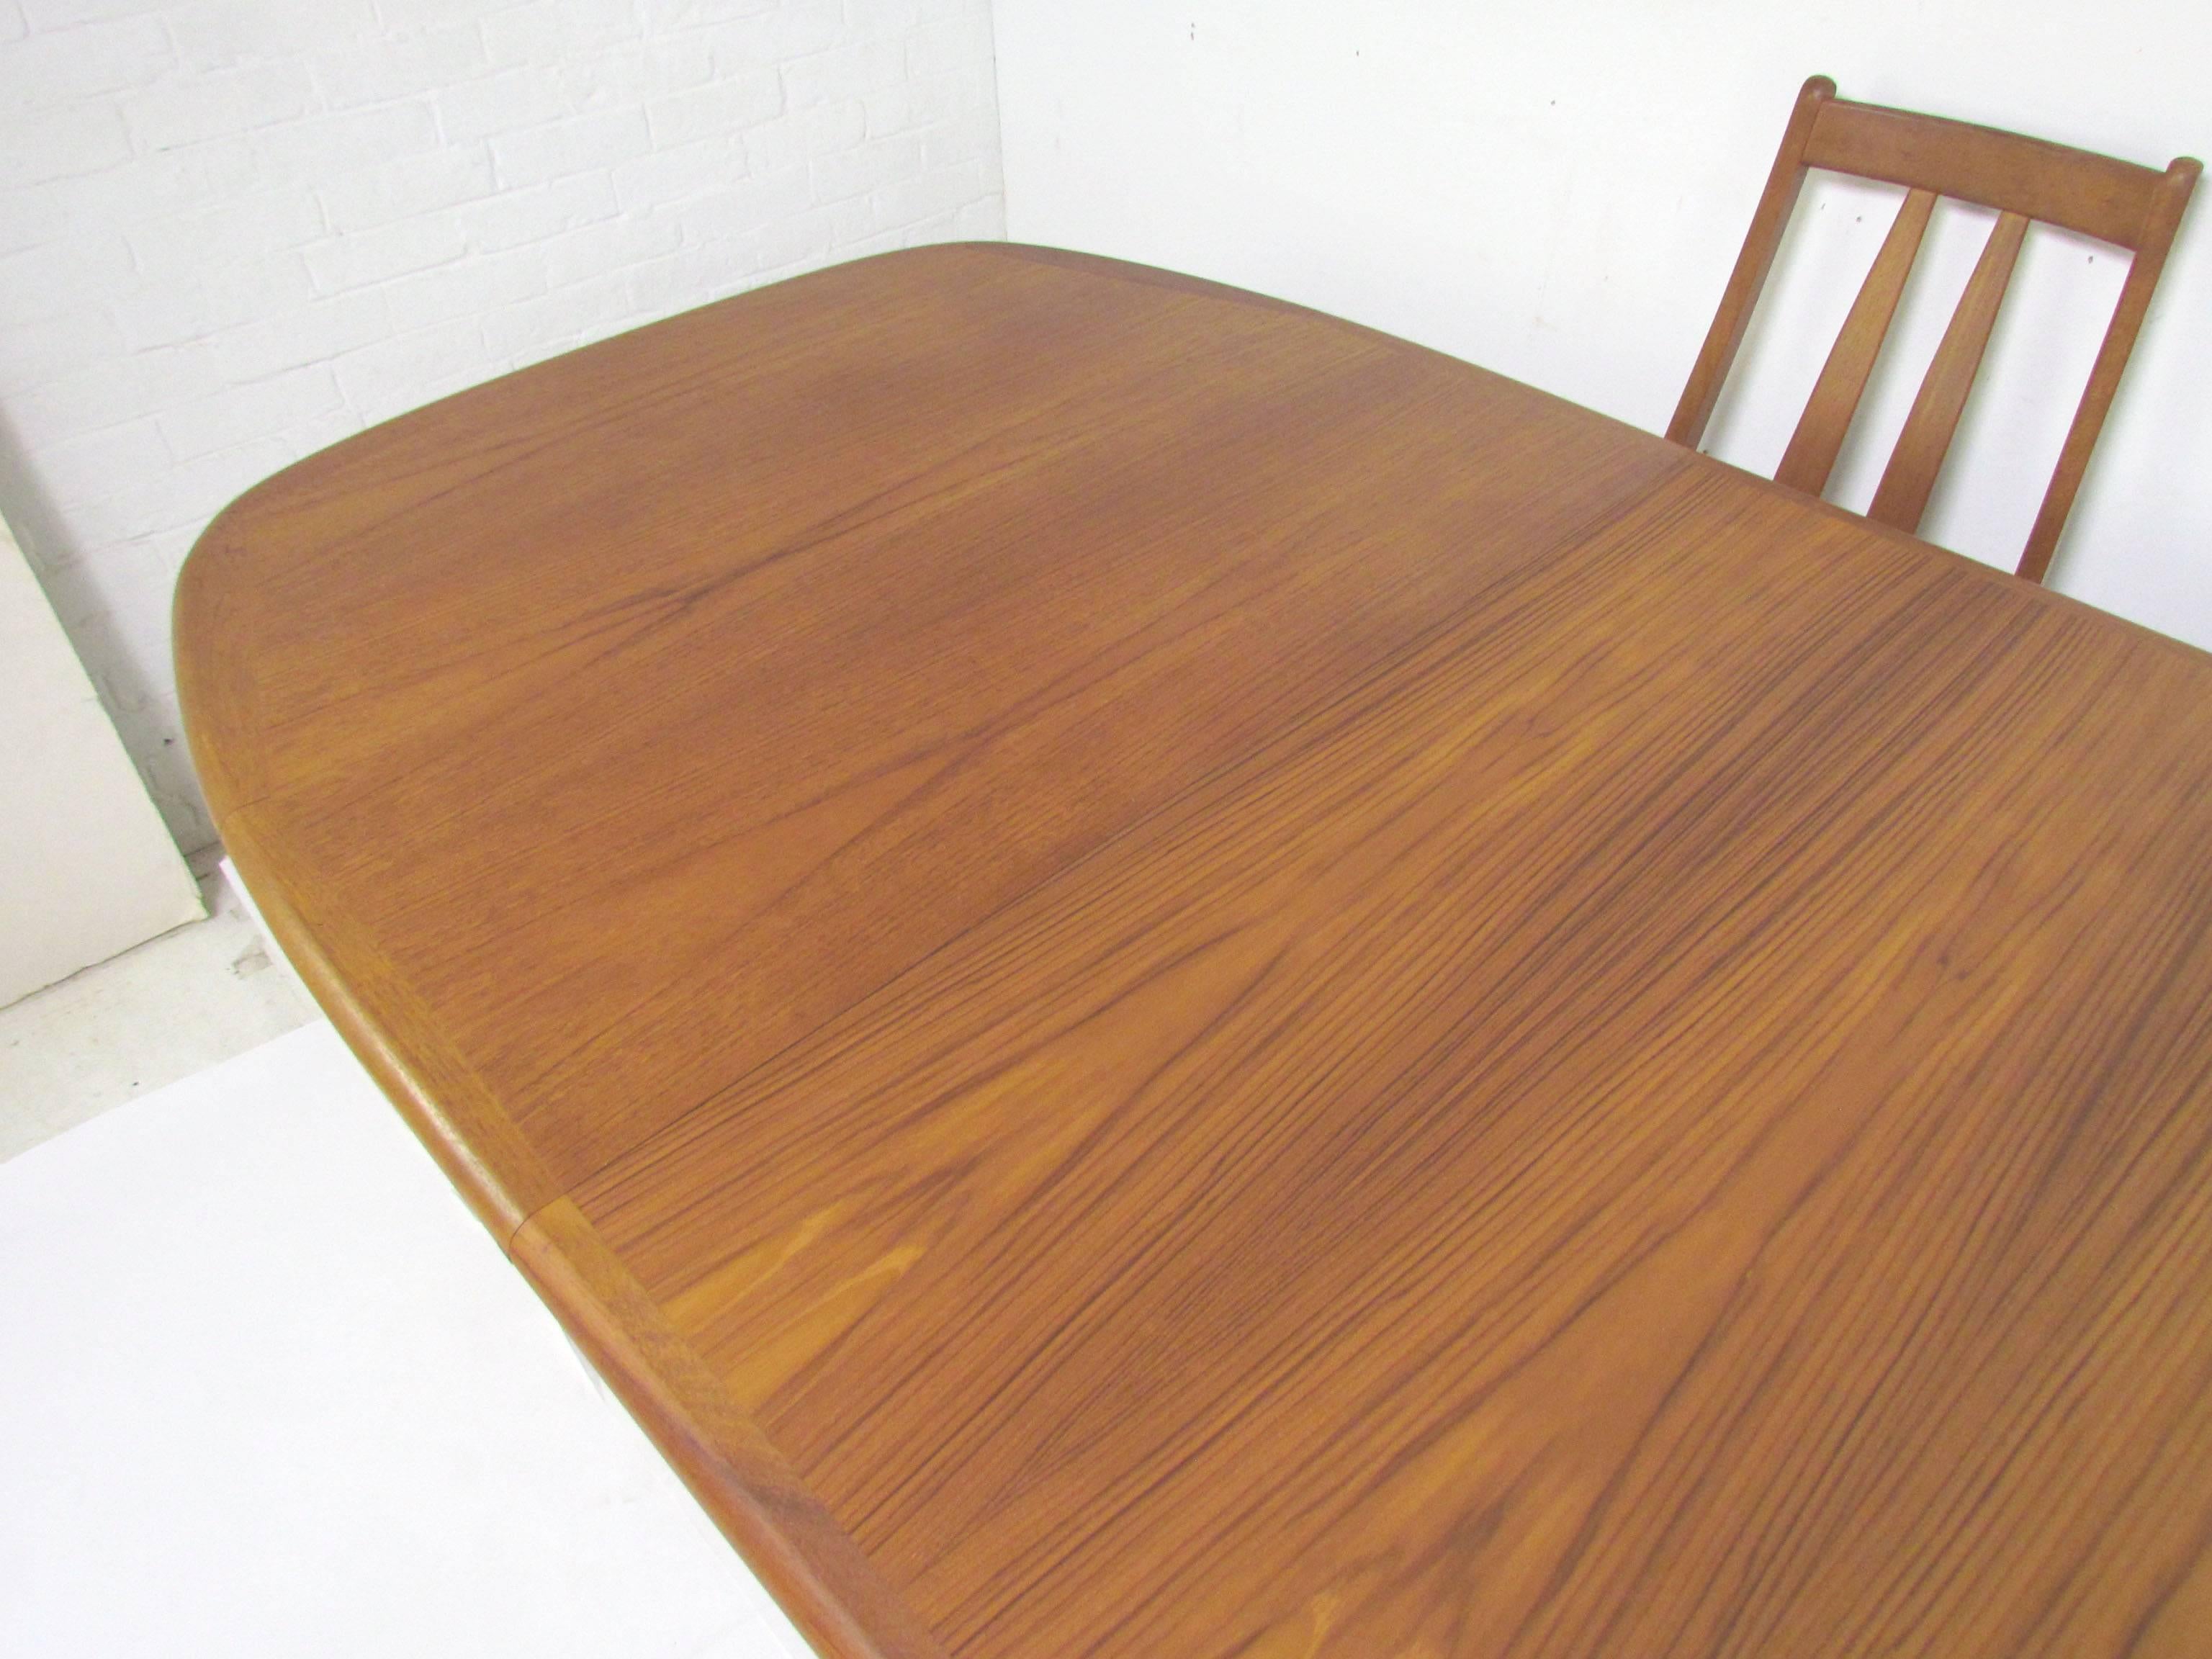 Cord Danish Teak Dining Set, Expandable Oval Table and Six Chairs, circa 1970s